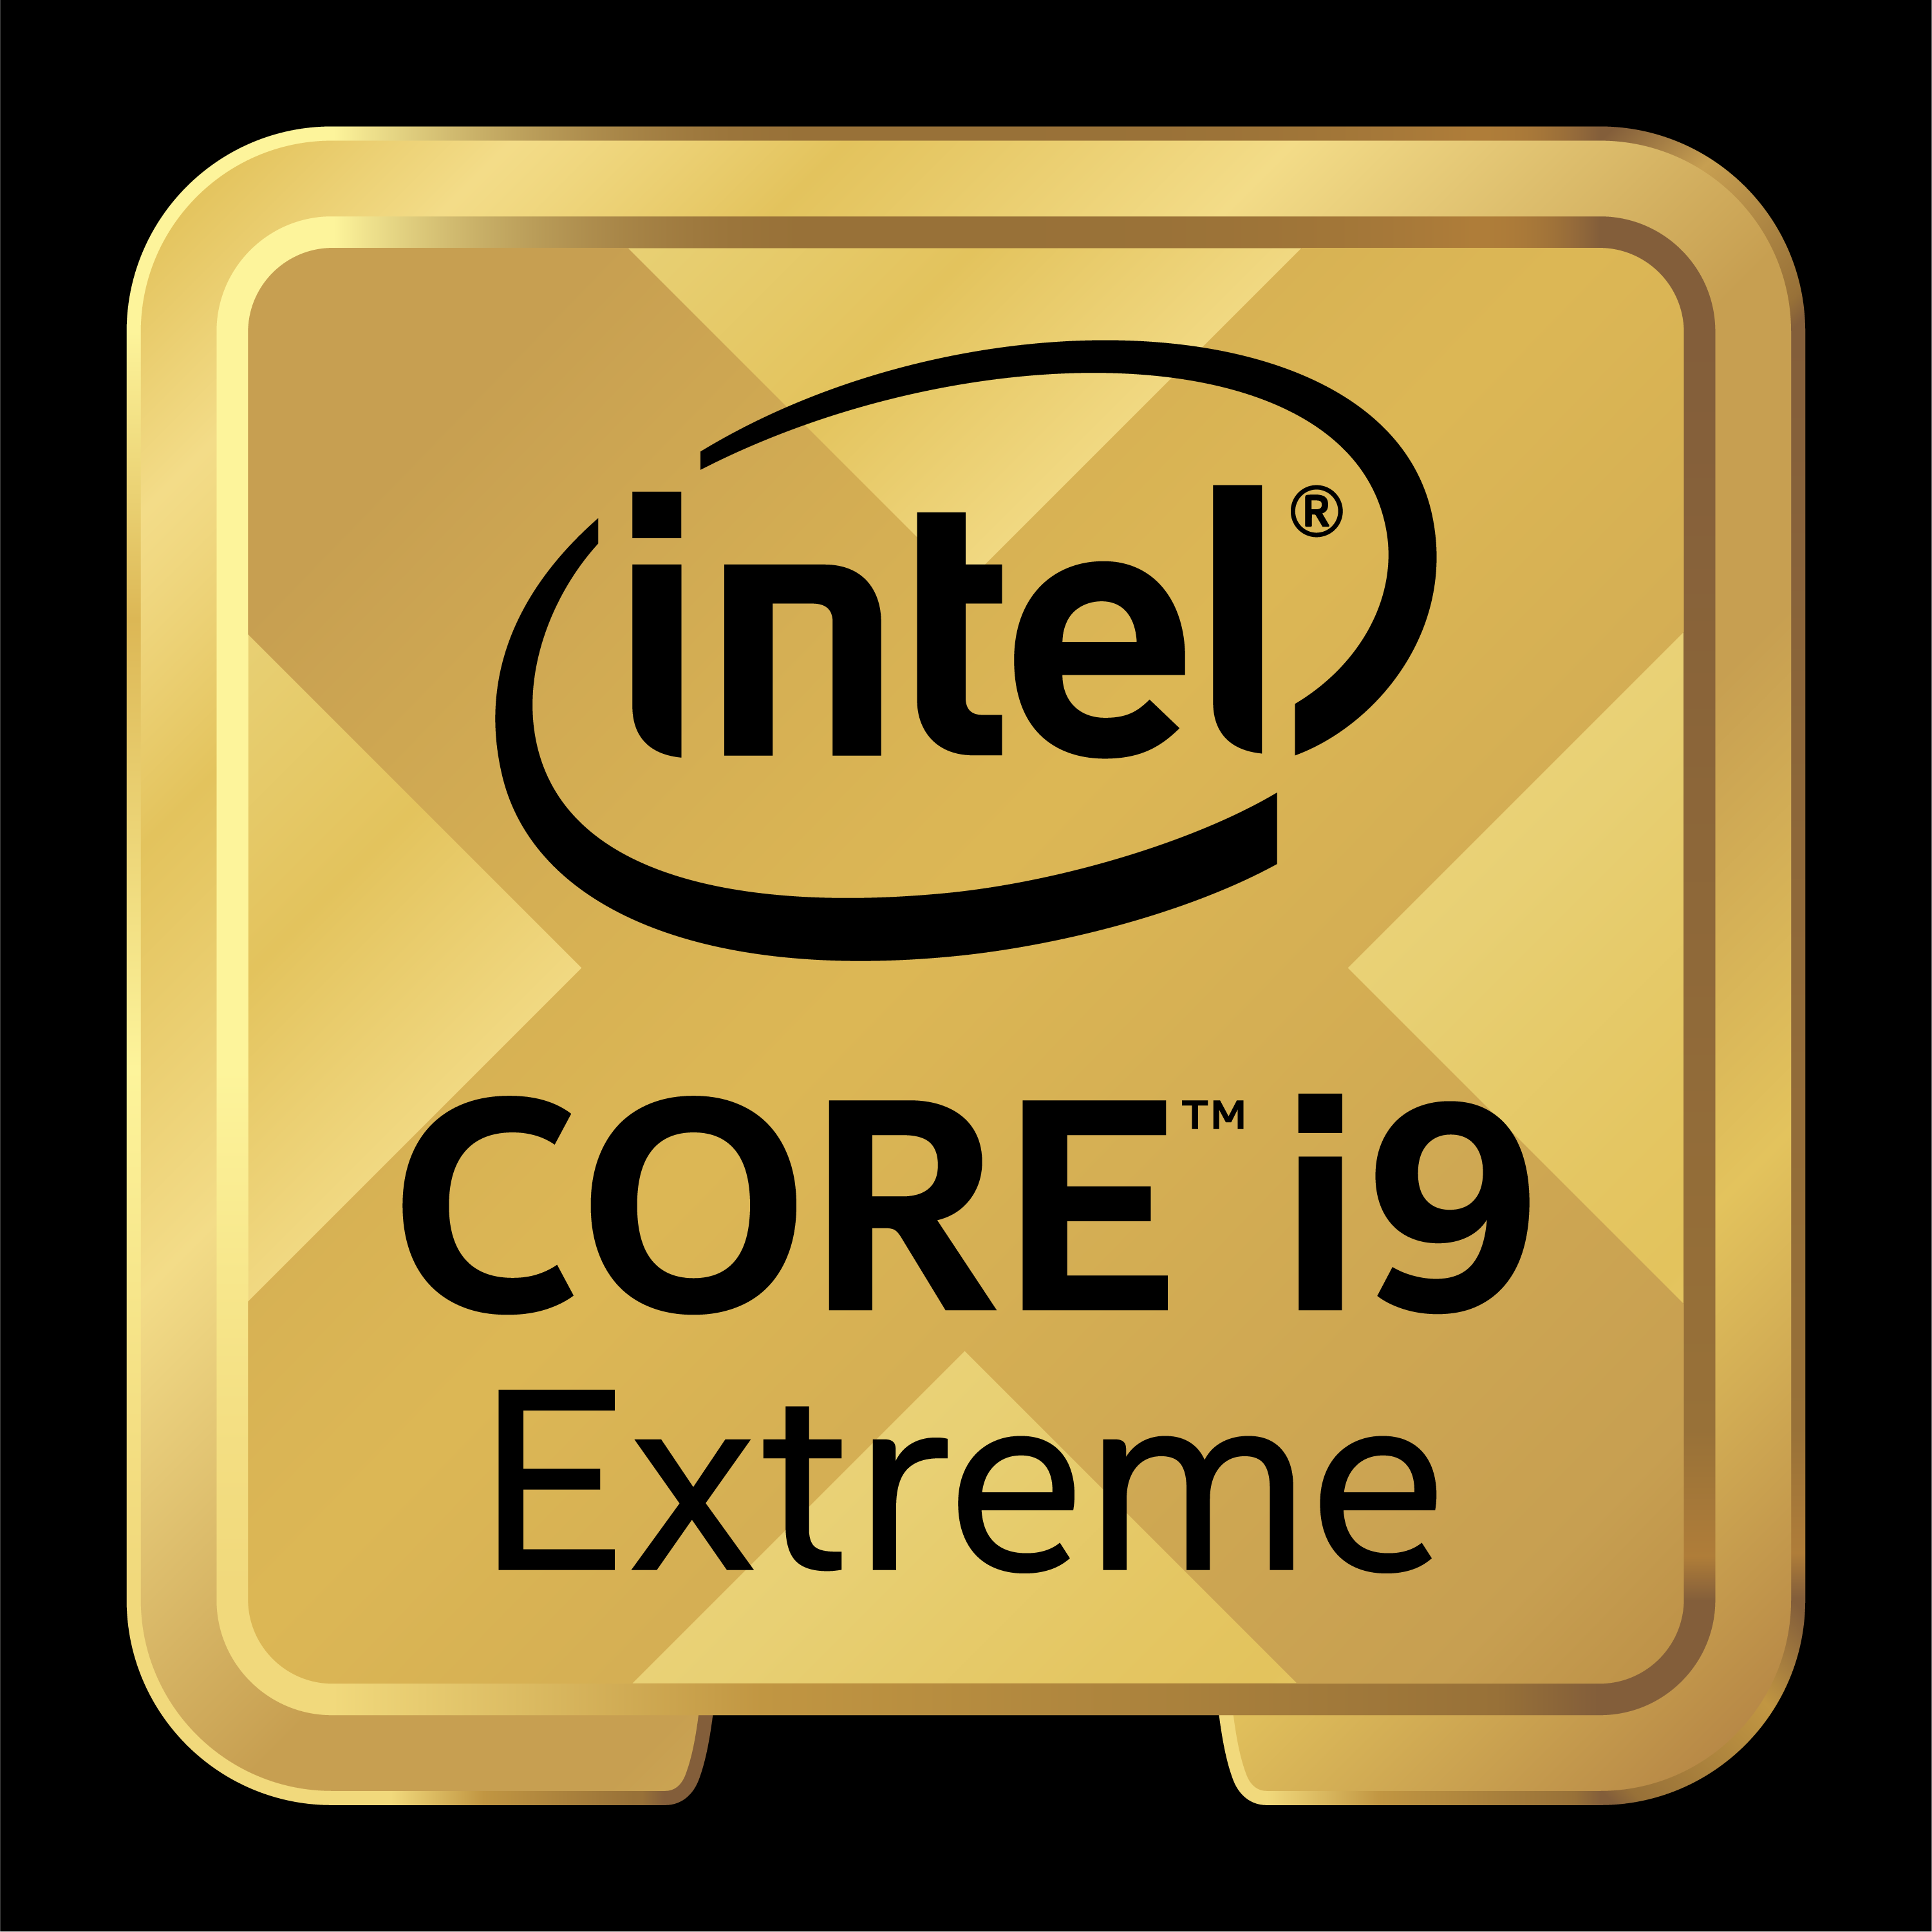 Intel Core i9 10980XE CPU Review - Page 12 of 14